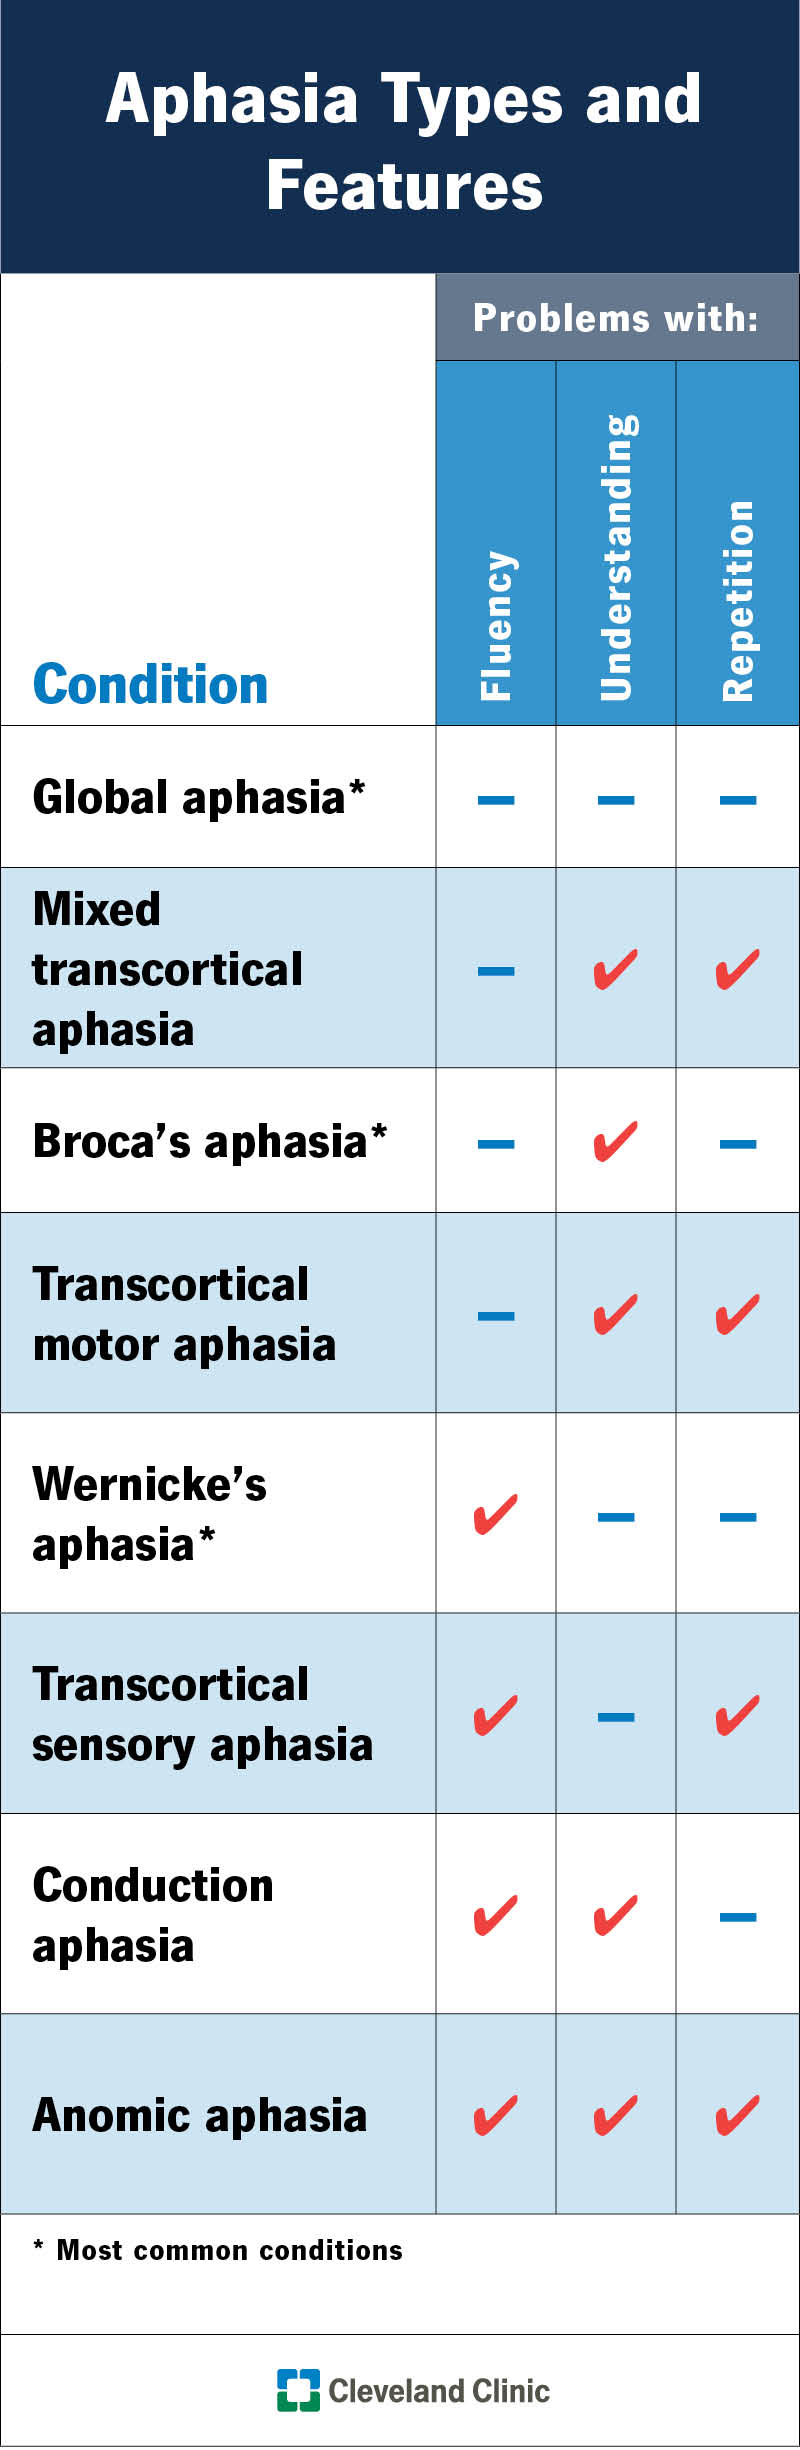 Experts determine the type of aphasia based on three criteria: fluency, repetition and understanding.